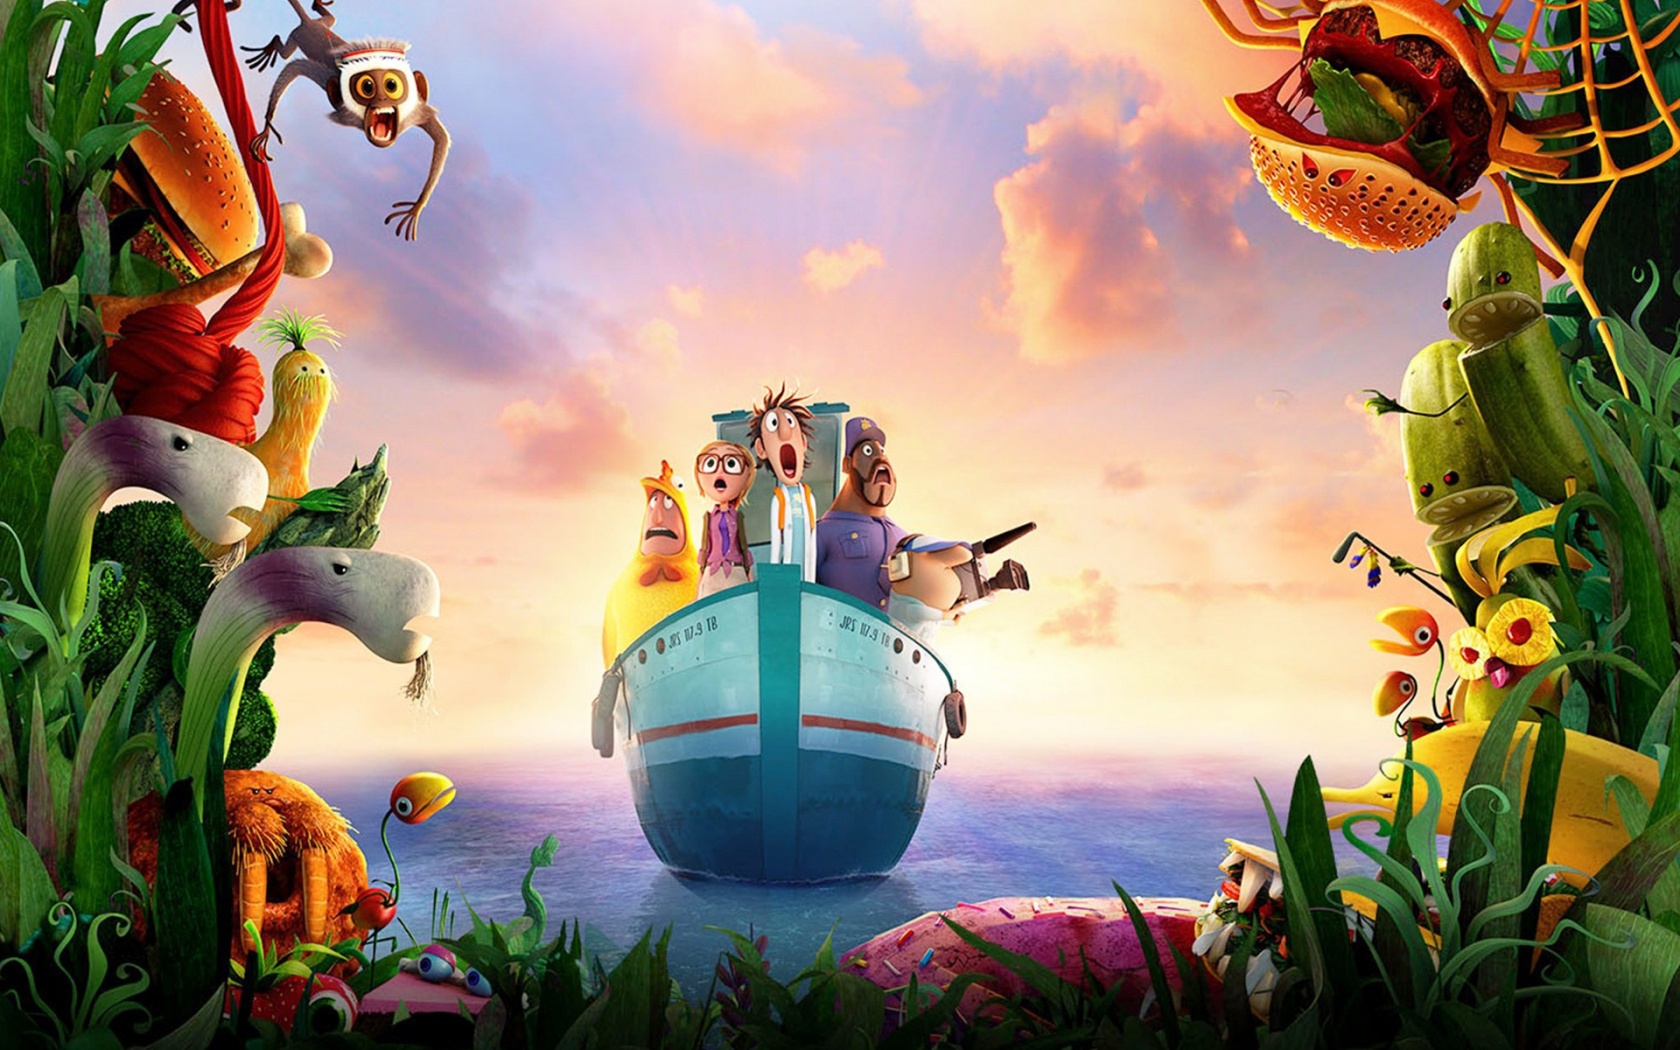 cloudy with a chance of meatballs 2 full movie online free download